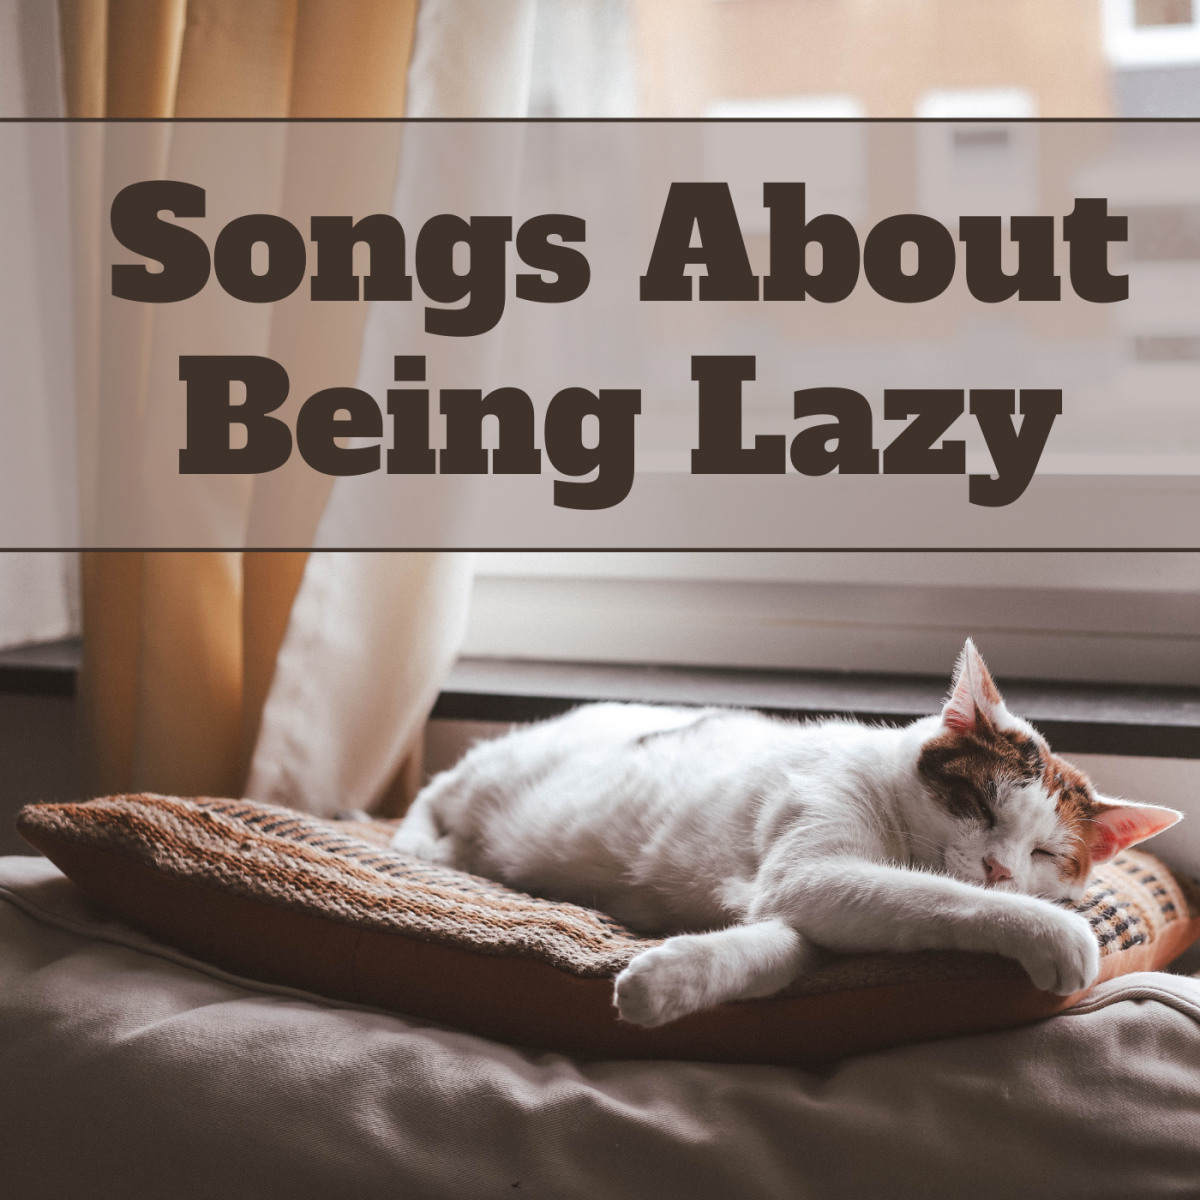 Songs to kick back and relax